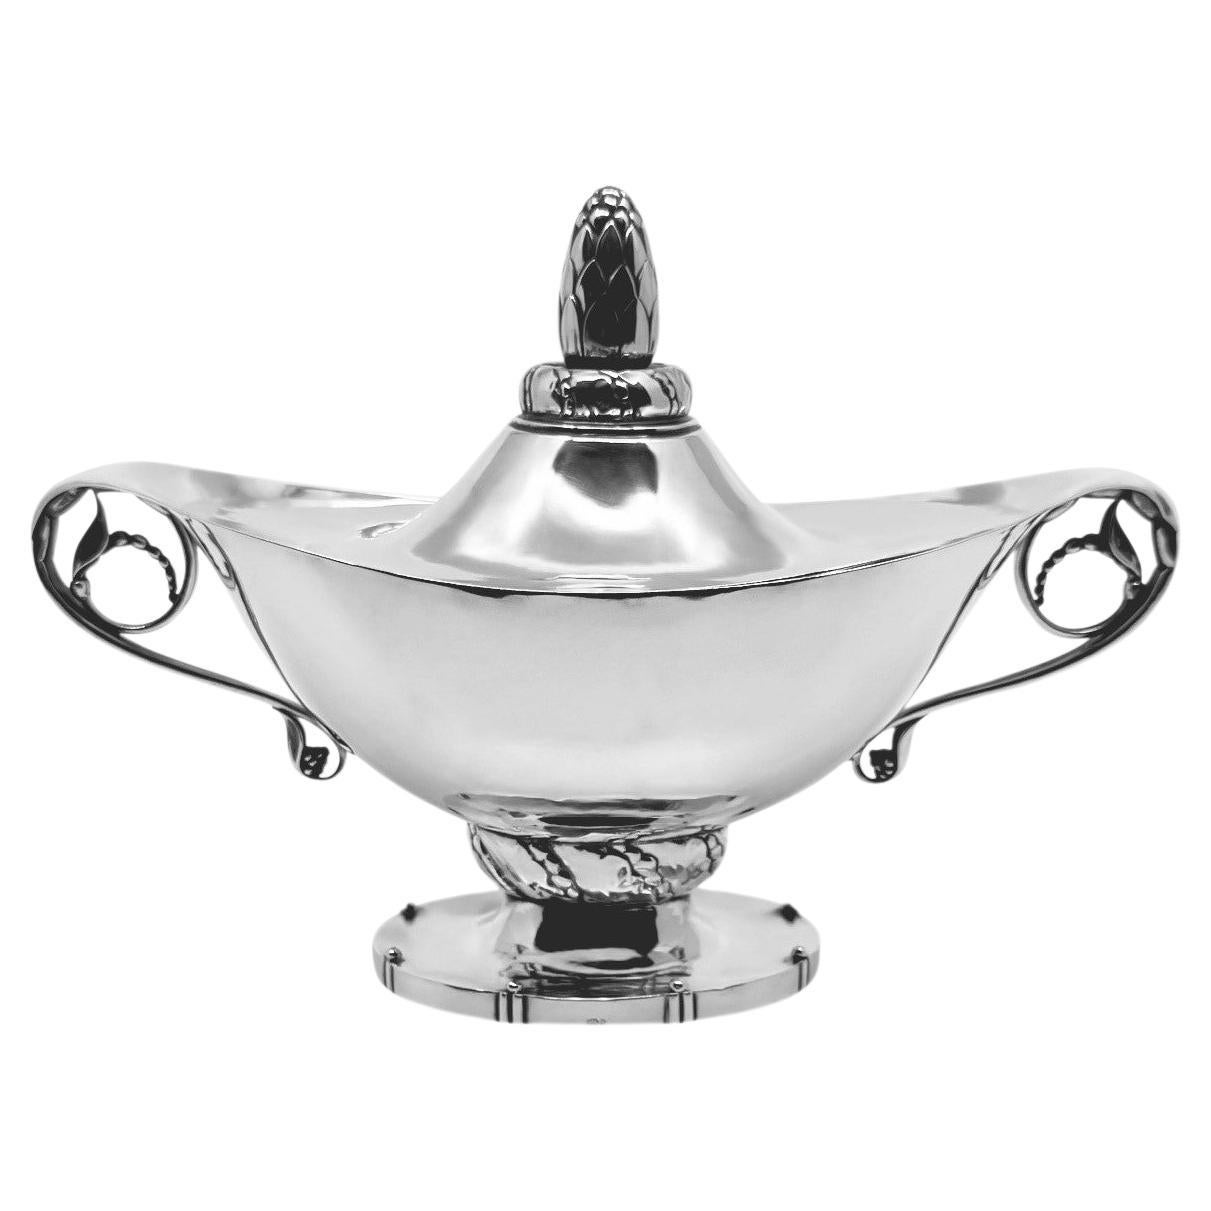 Georg Jensen Silver Bonbonniere With Acorn Finial 170 For Sale